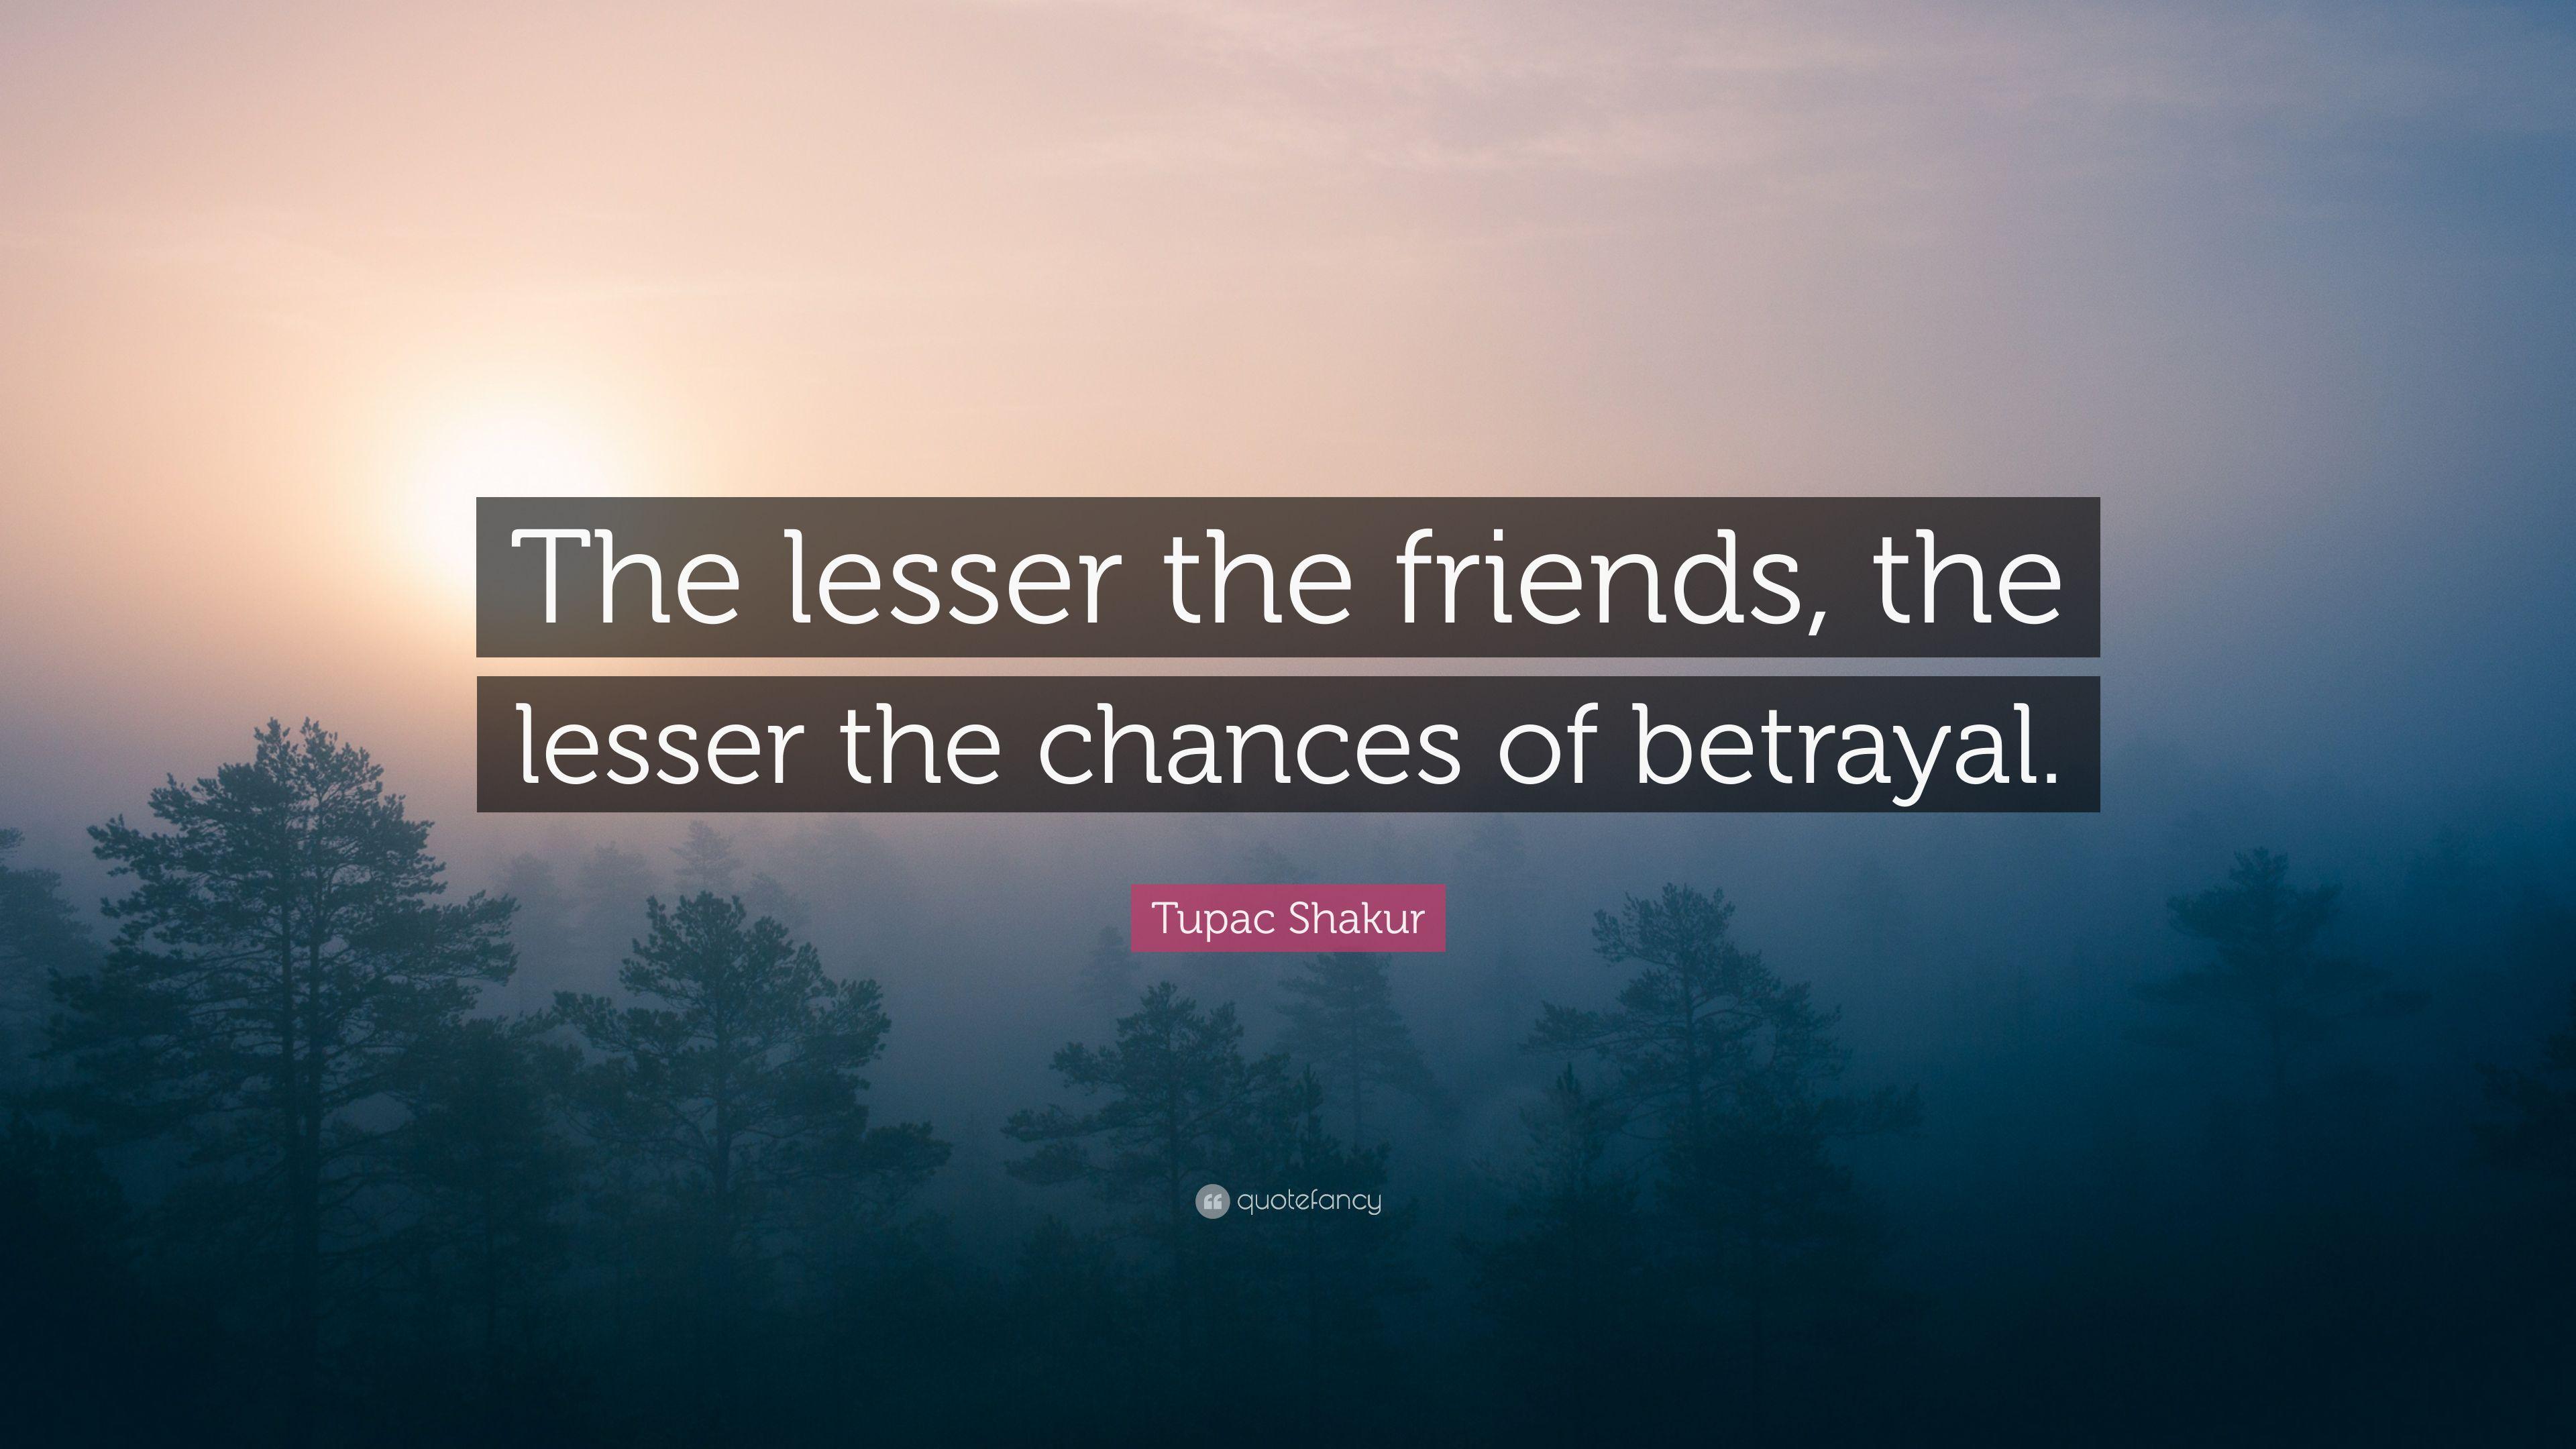 Tupac Shakur Quote: “The lesser the friends, the lesser